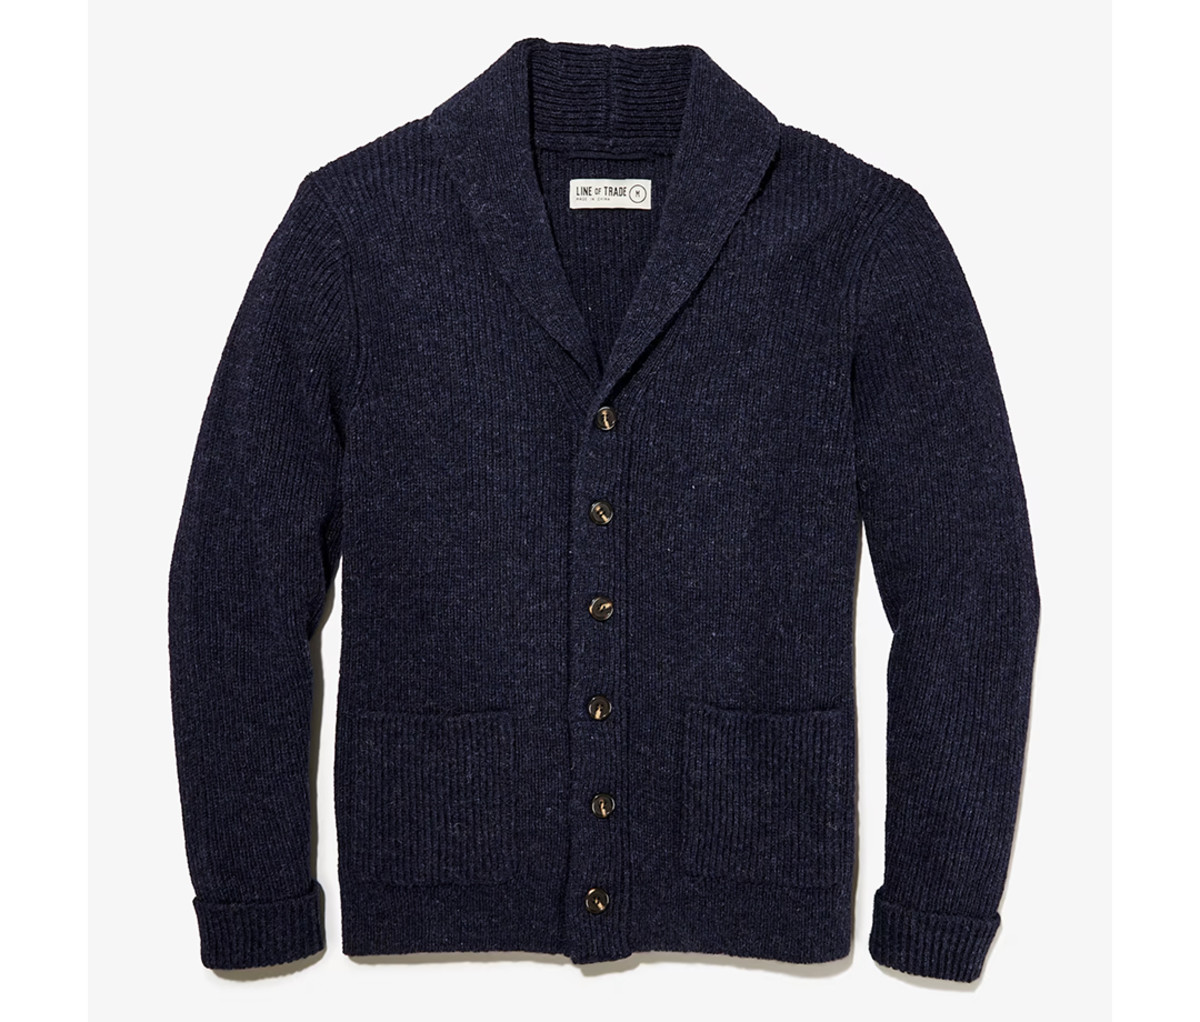 Your Fall Wardrobe Needs This Line of Trade Cardigan - Men's Journal